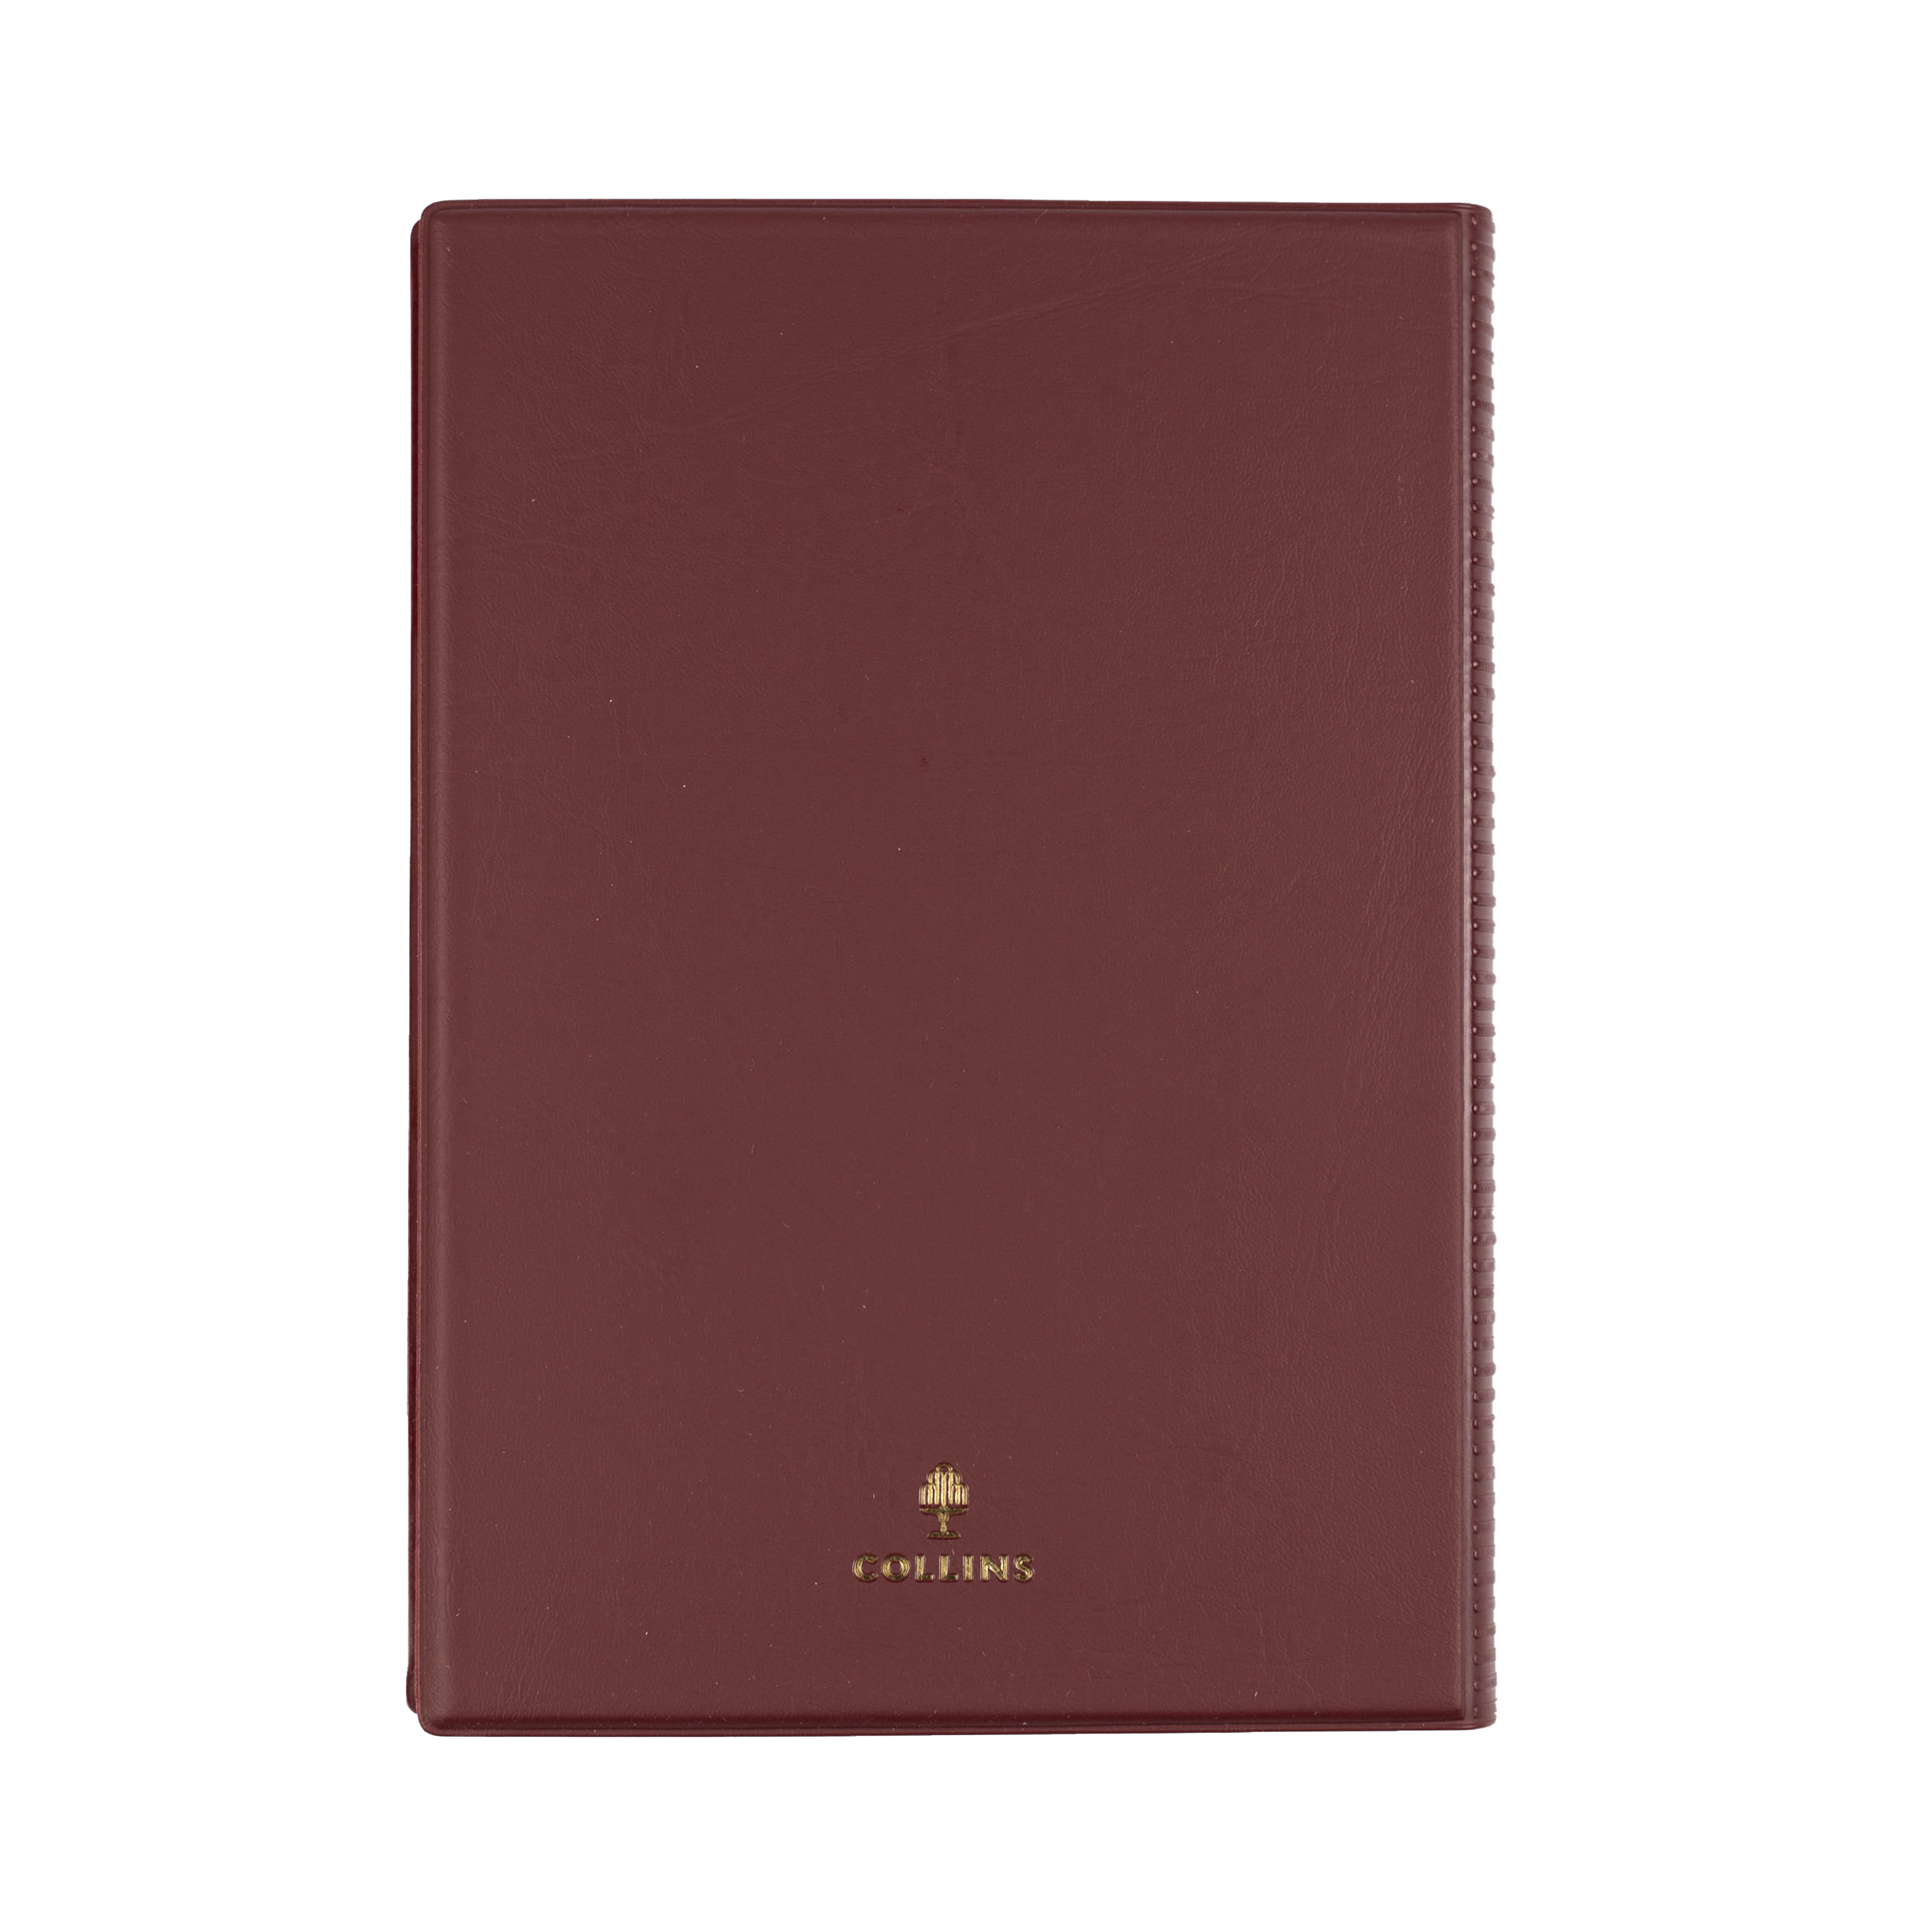 Belmont Desk 2024 Diary - Day to Page, Size A5 Burgundy / A5 (210 x 148mm)